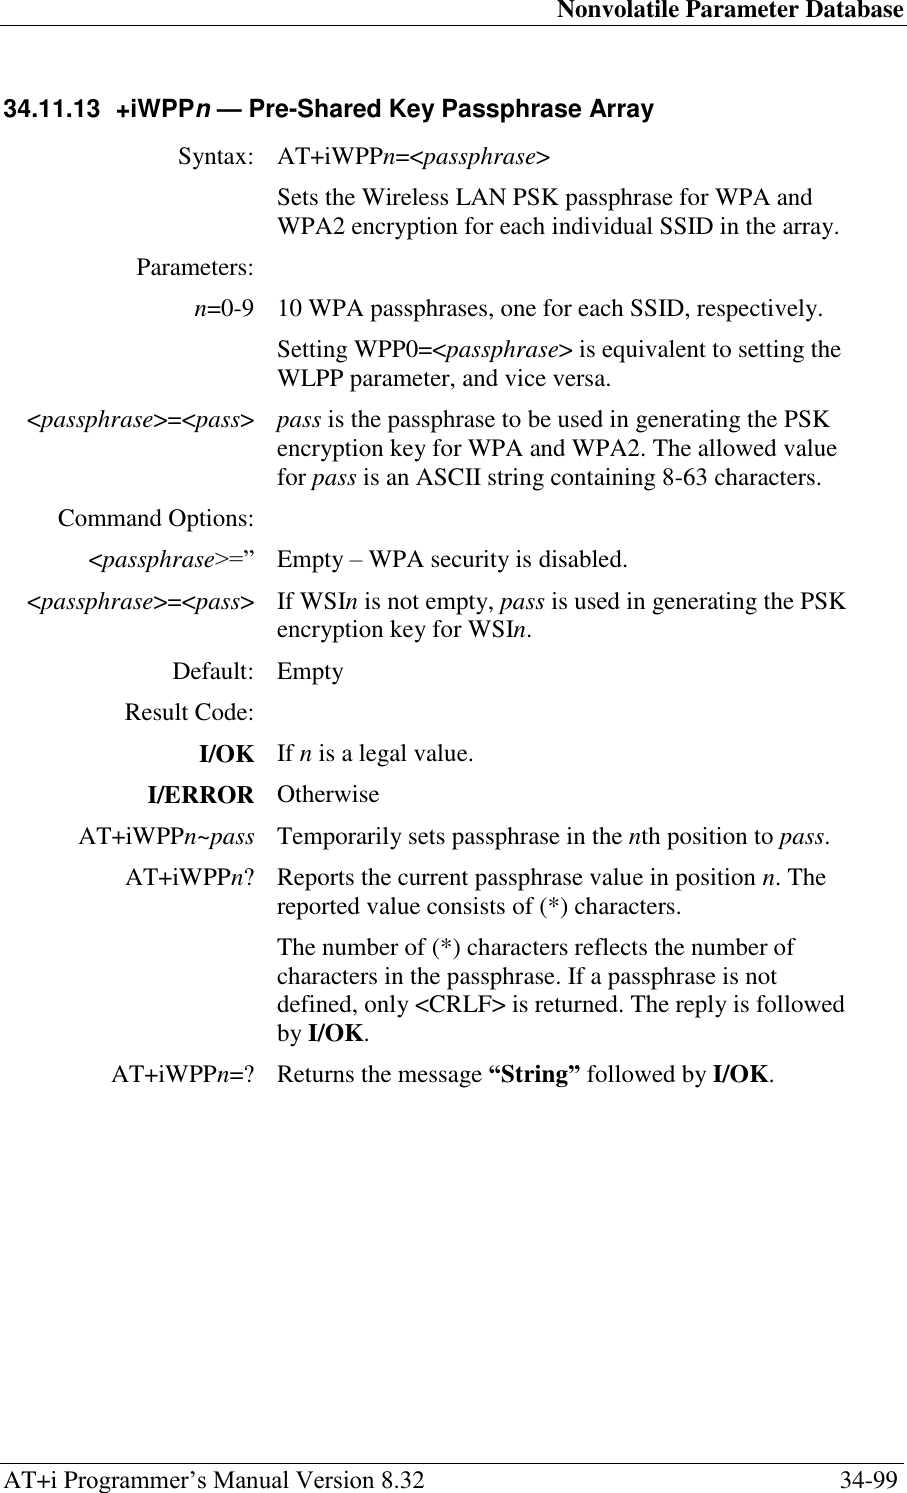 Nonvolatile Parameter Database AT+i Programmer‘s Manual Version 8.32  34-99 34.11.13  +iWPPn — Pre-Shared Key Passphrase Array  Syntax: AT+iWPPn=&lt;passphrase&gt;  Sets the Wireless LAN PSK passphrase for WPA and WPA2 encryption for each individual SSID in the array. Parameters:  n=0-9 10 WPA passphrases, one for each SSID, respectively. Setting WPP0=&lt;passphrase&gt; is equivalent to setting the WLPP parameter, and vice versa. &lt;passphrase&gt;=&lt;pass&gt; pass is the passphrase to be used in generating the PSK encryption key for WPA and WPA2. The allowed value for pass is an ASCII string containing 8-63 characters. Command Options:  &lt;passphrase&gt;=‖ Empty – WPA security is disabled. &lt;passphrase&gt;=&lt;pass&gt; If WSIn is not empty, pass is used in generating the PSK encryption key for WSIn. Default: Empty Result Code:  I/OK If n is a legal value. I/ERROR Otherwise AT+iWPPn~pass Temporarily sets passphrase in the nth position to pass. AT+iWPPn? Reports the current passphrase value in position n. The reported value consists of (*) characters. The number of (*) characters reflects the number of characters in the passphrase. If a passphrase is not defined, only &lt;CRLF&gt; is returned. The reply is followed by I/OK. AT+iWPPn=? Returns the message “String” followed by I/OK. 